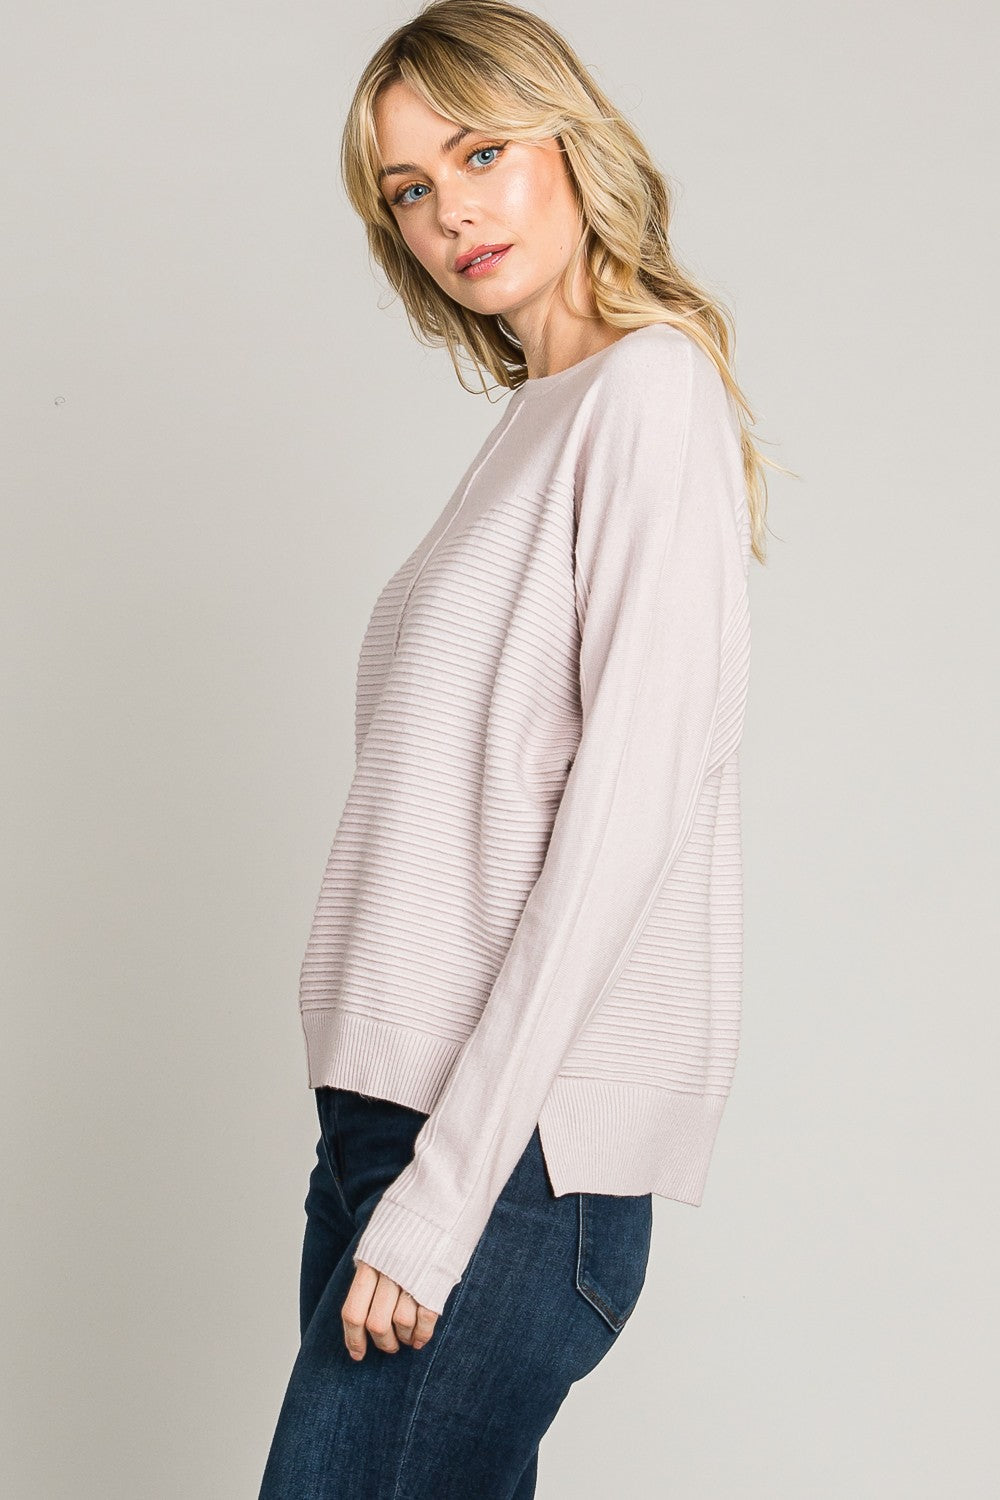 Sweetheart Textured Top | 4 Colors